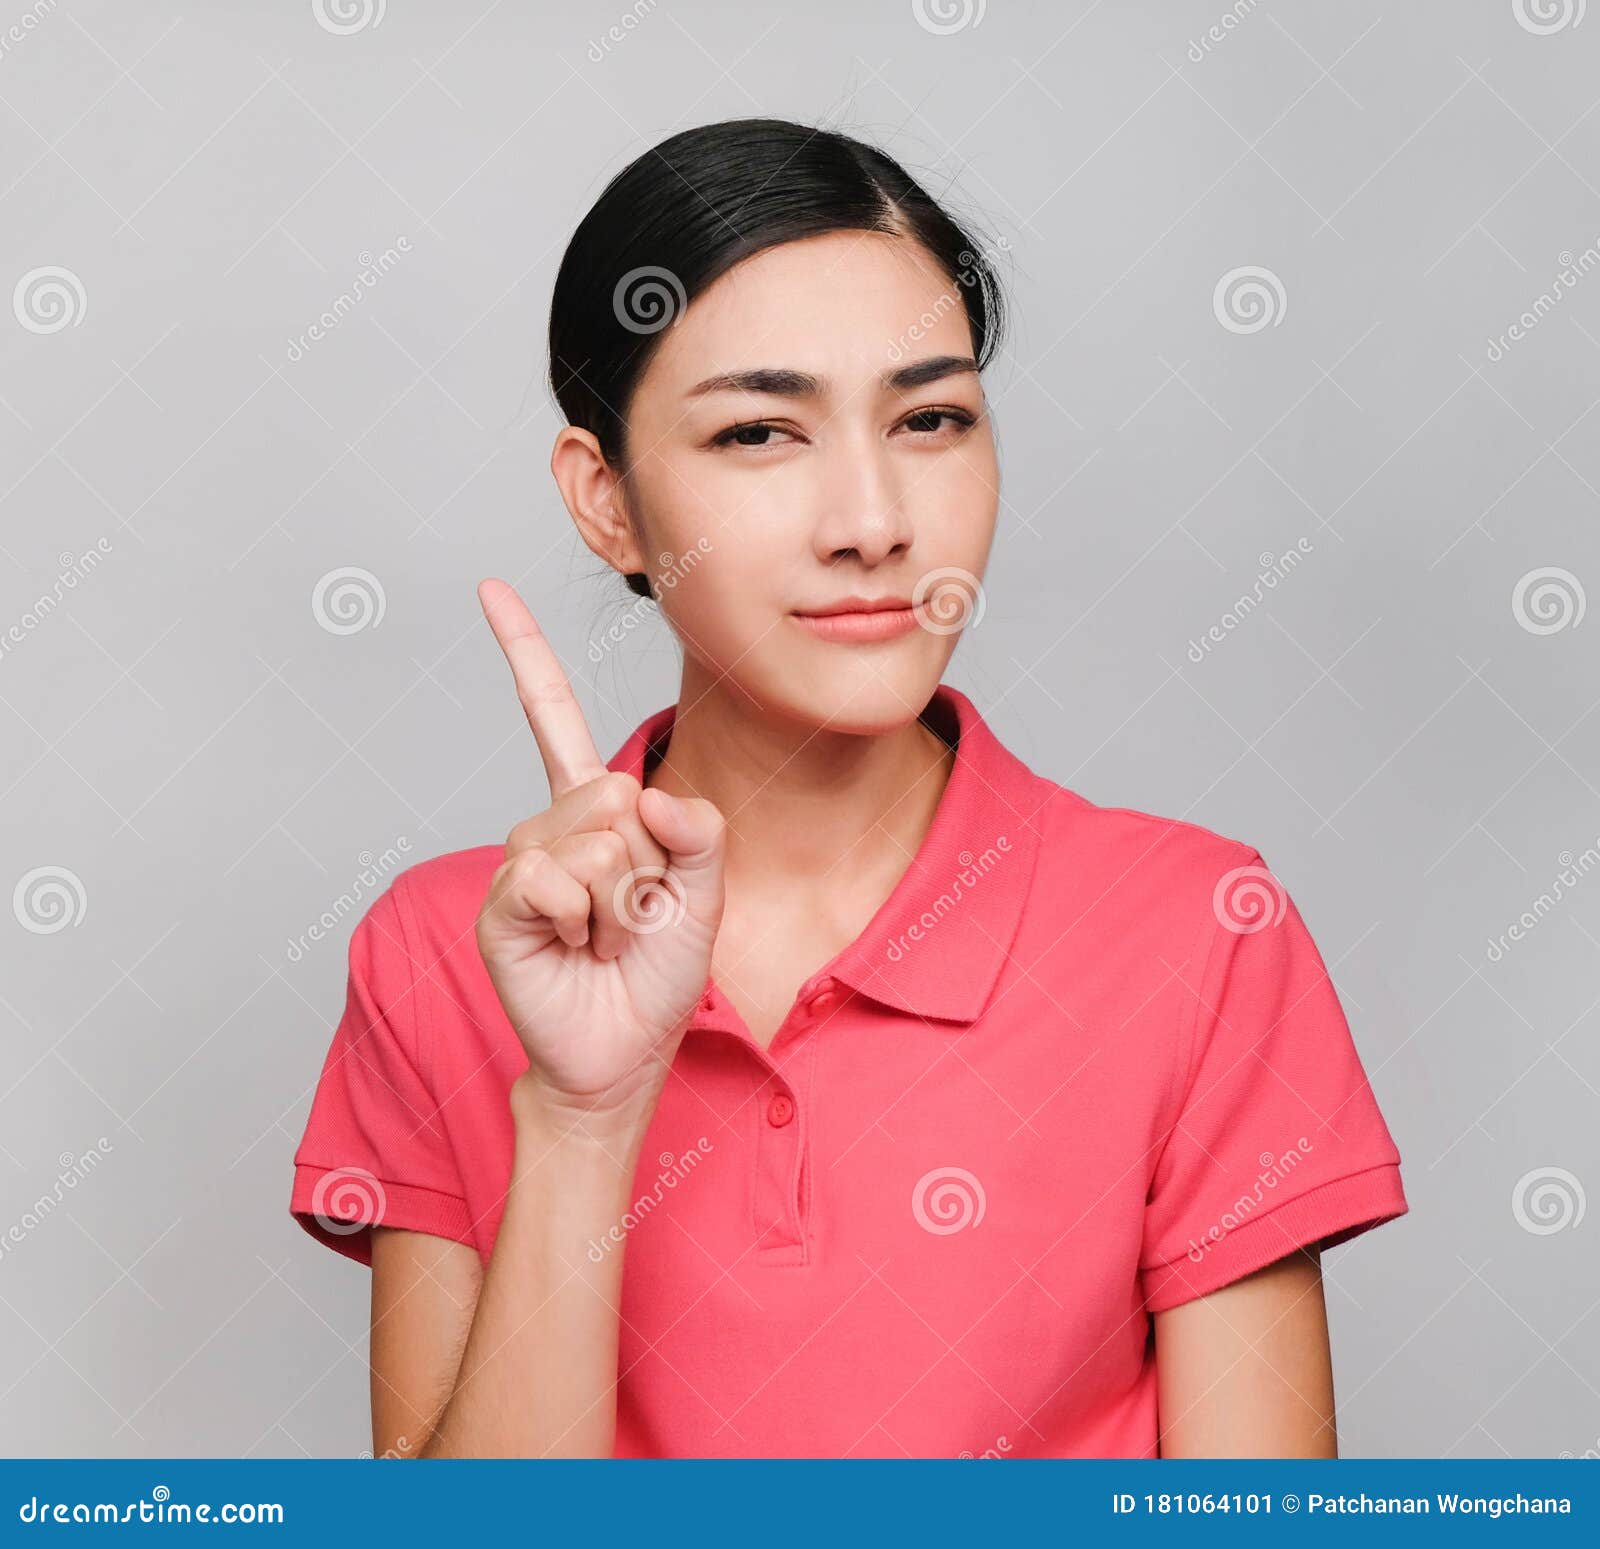 young beautiful asian woman wore pink t shirt, showed pointing and wondering expression , on gray background